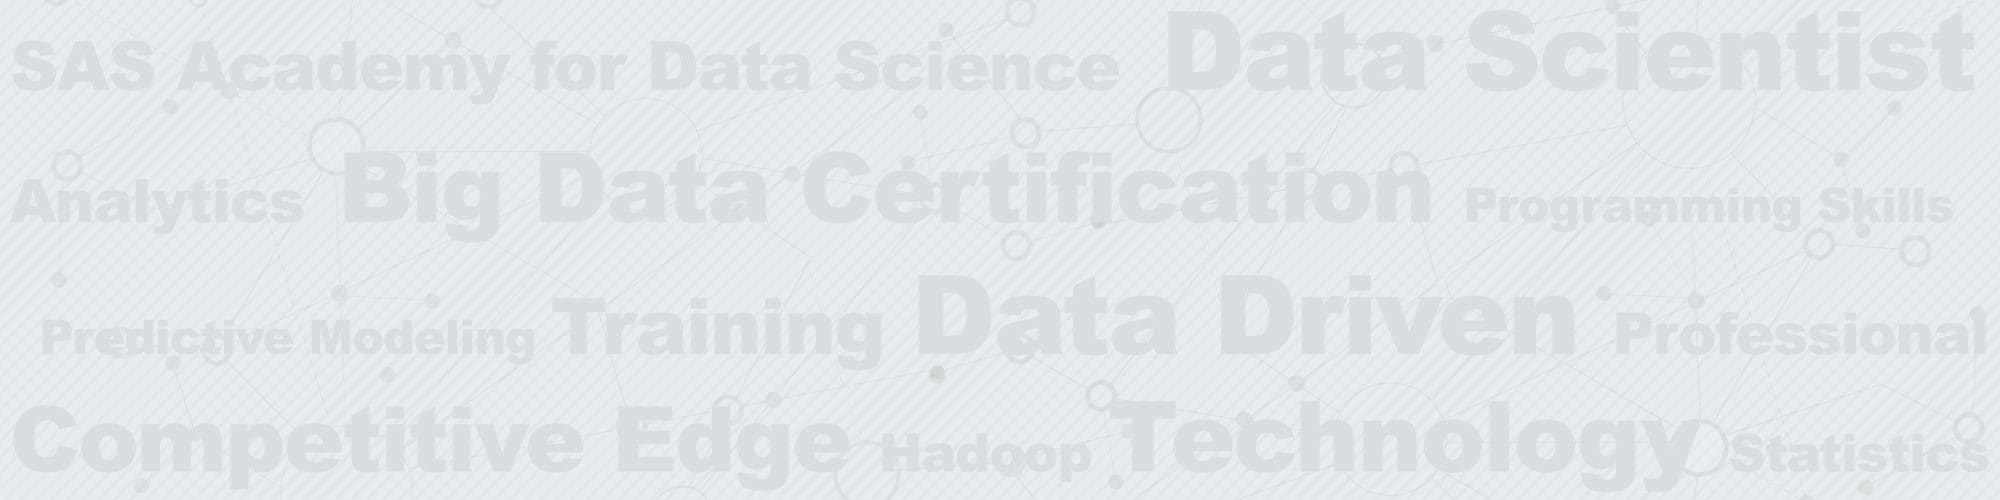 Academy for data science words